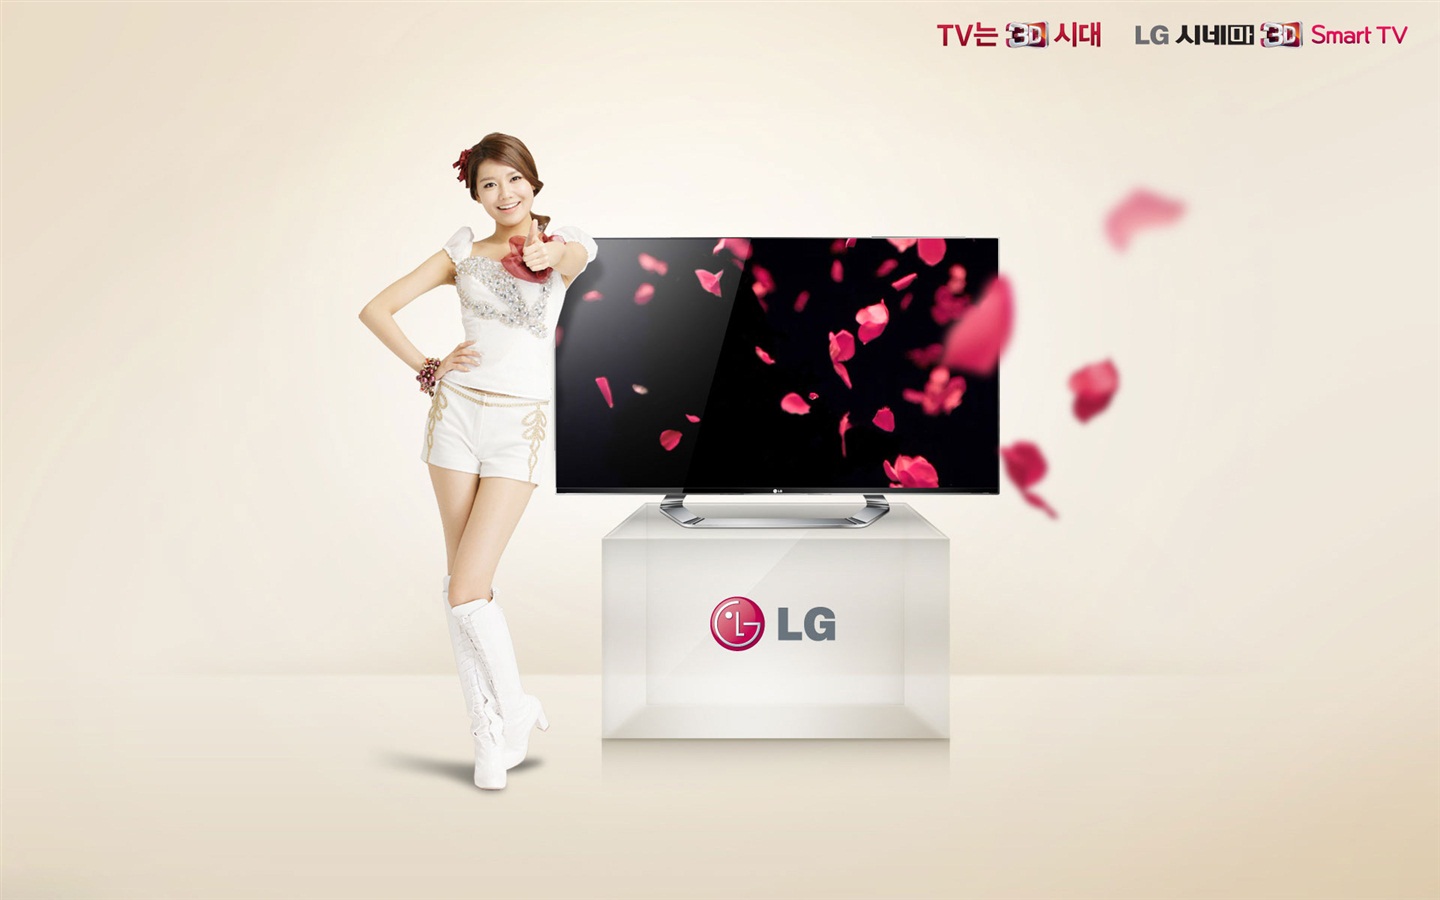 Girls Generation ACE and LG endorsements ads HD wallpapers #12 - 1440x900